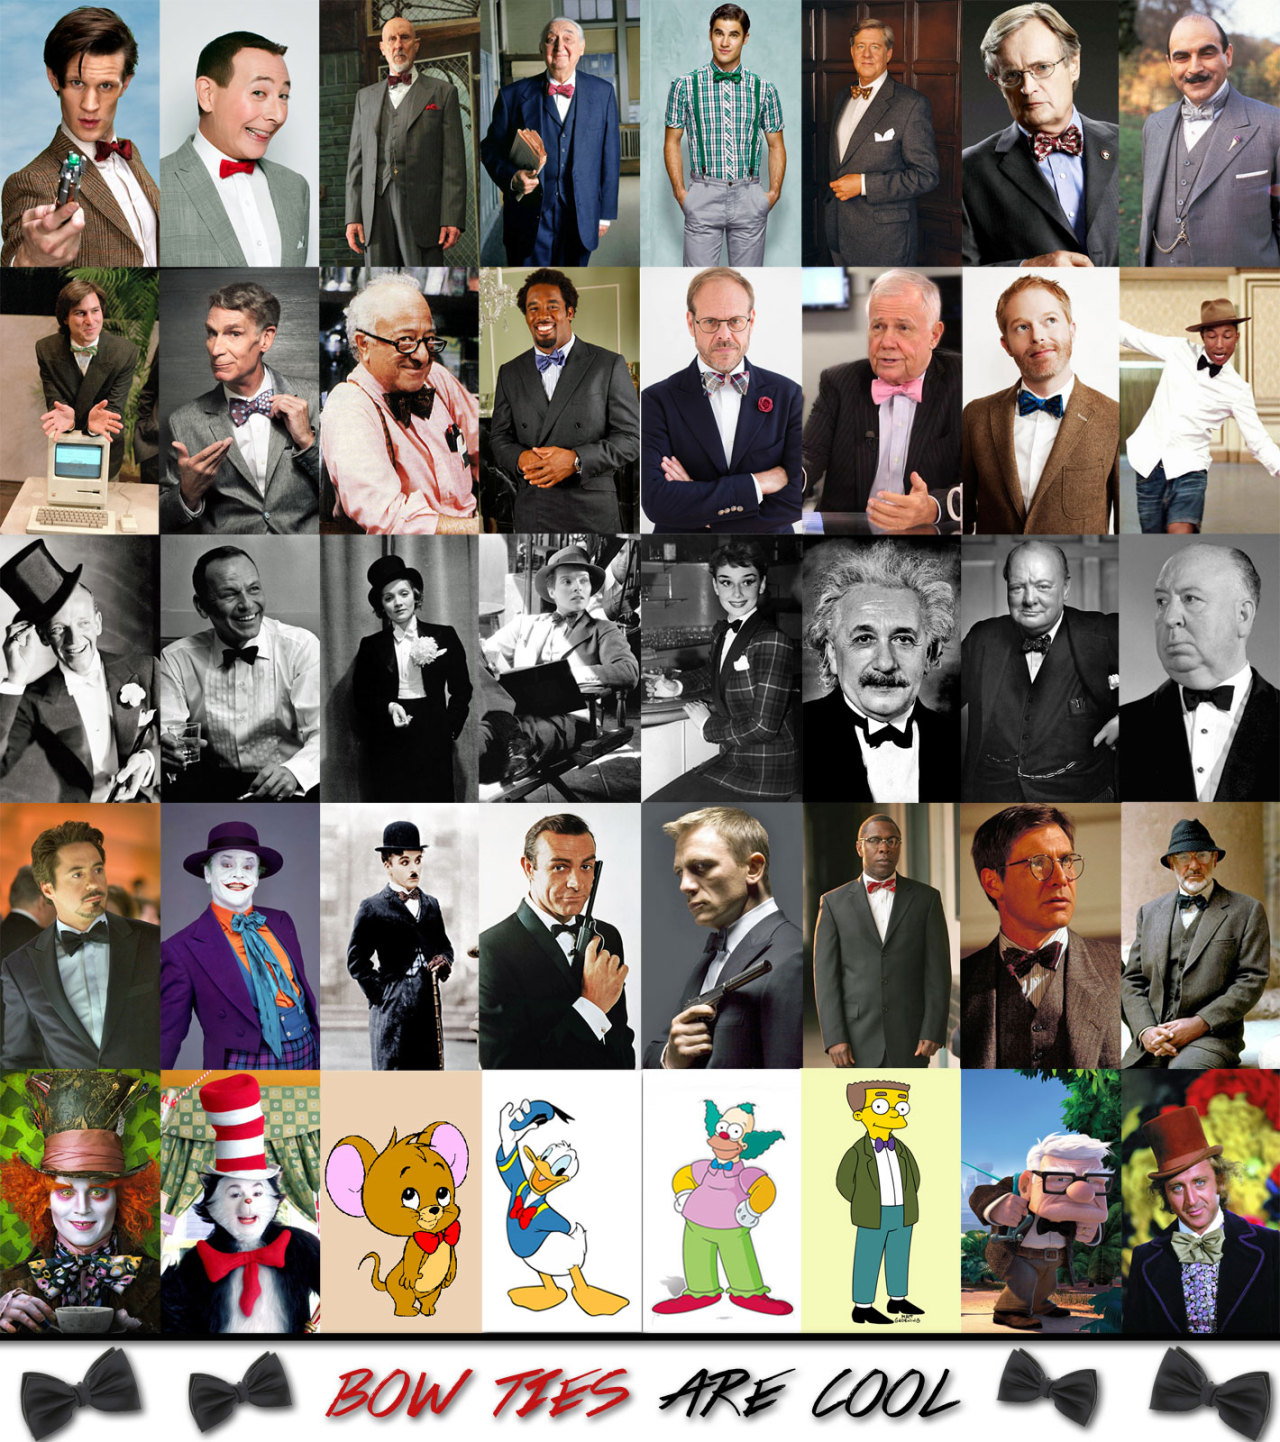 Collage of bow tie wearing iconic characters to represent National Bow Tie Day and encourage fun holidays to take part in.